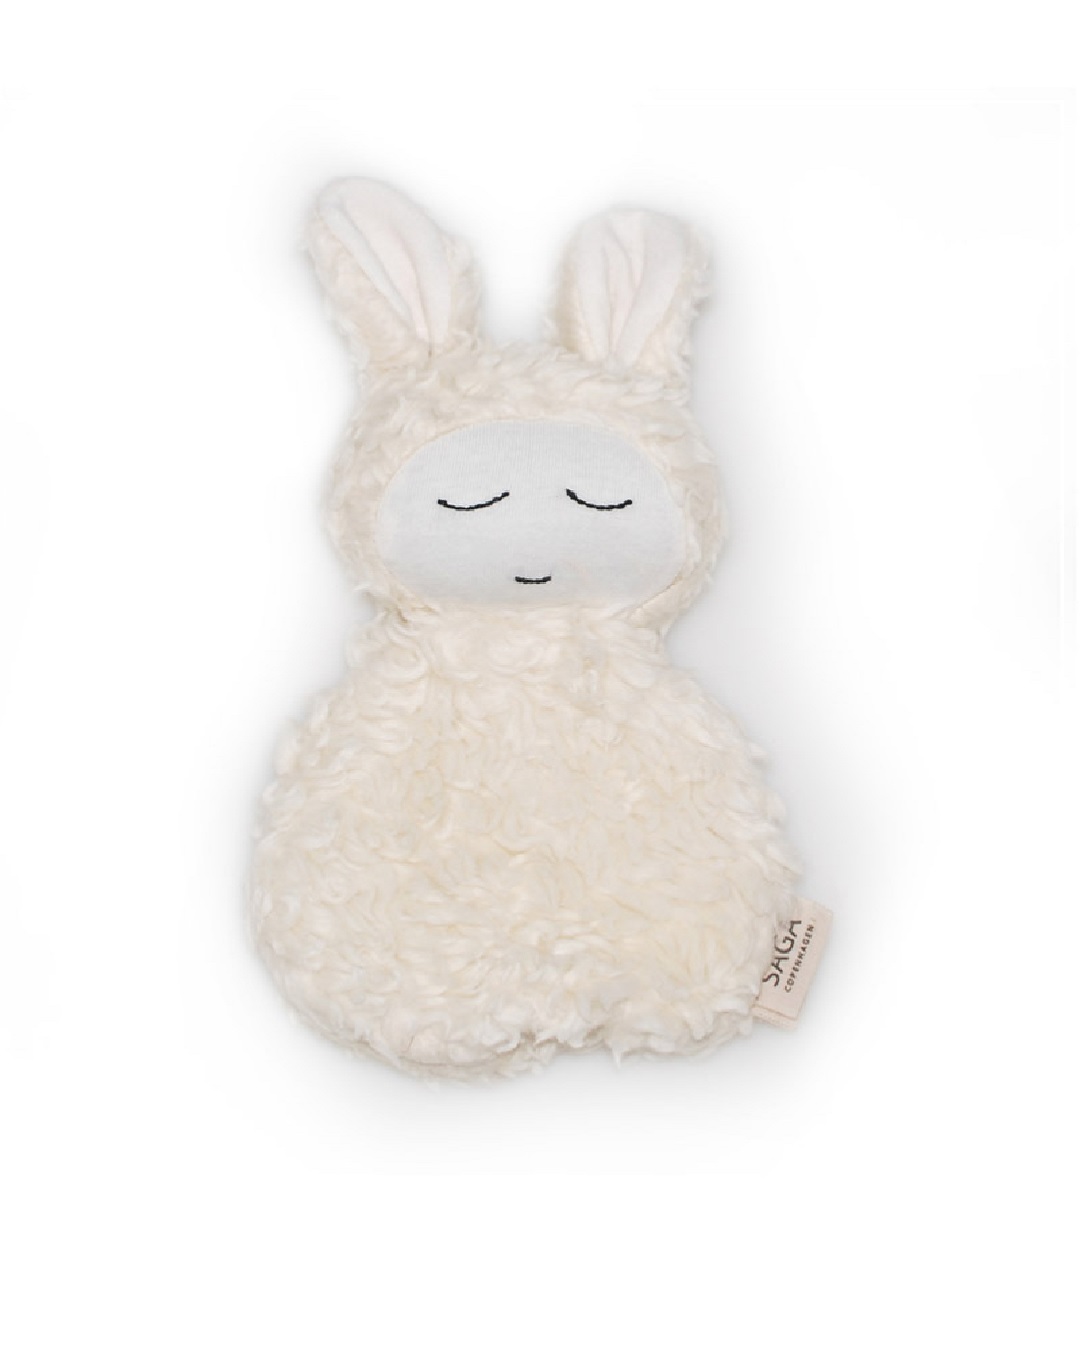 Lara the sheep cuddle doll for babies